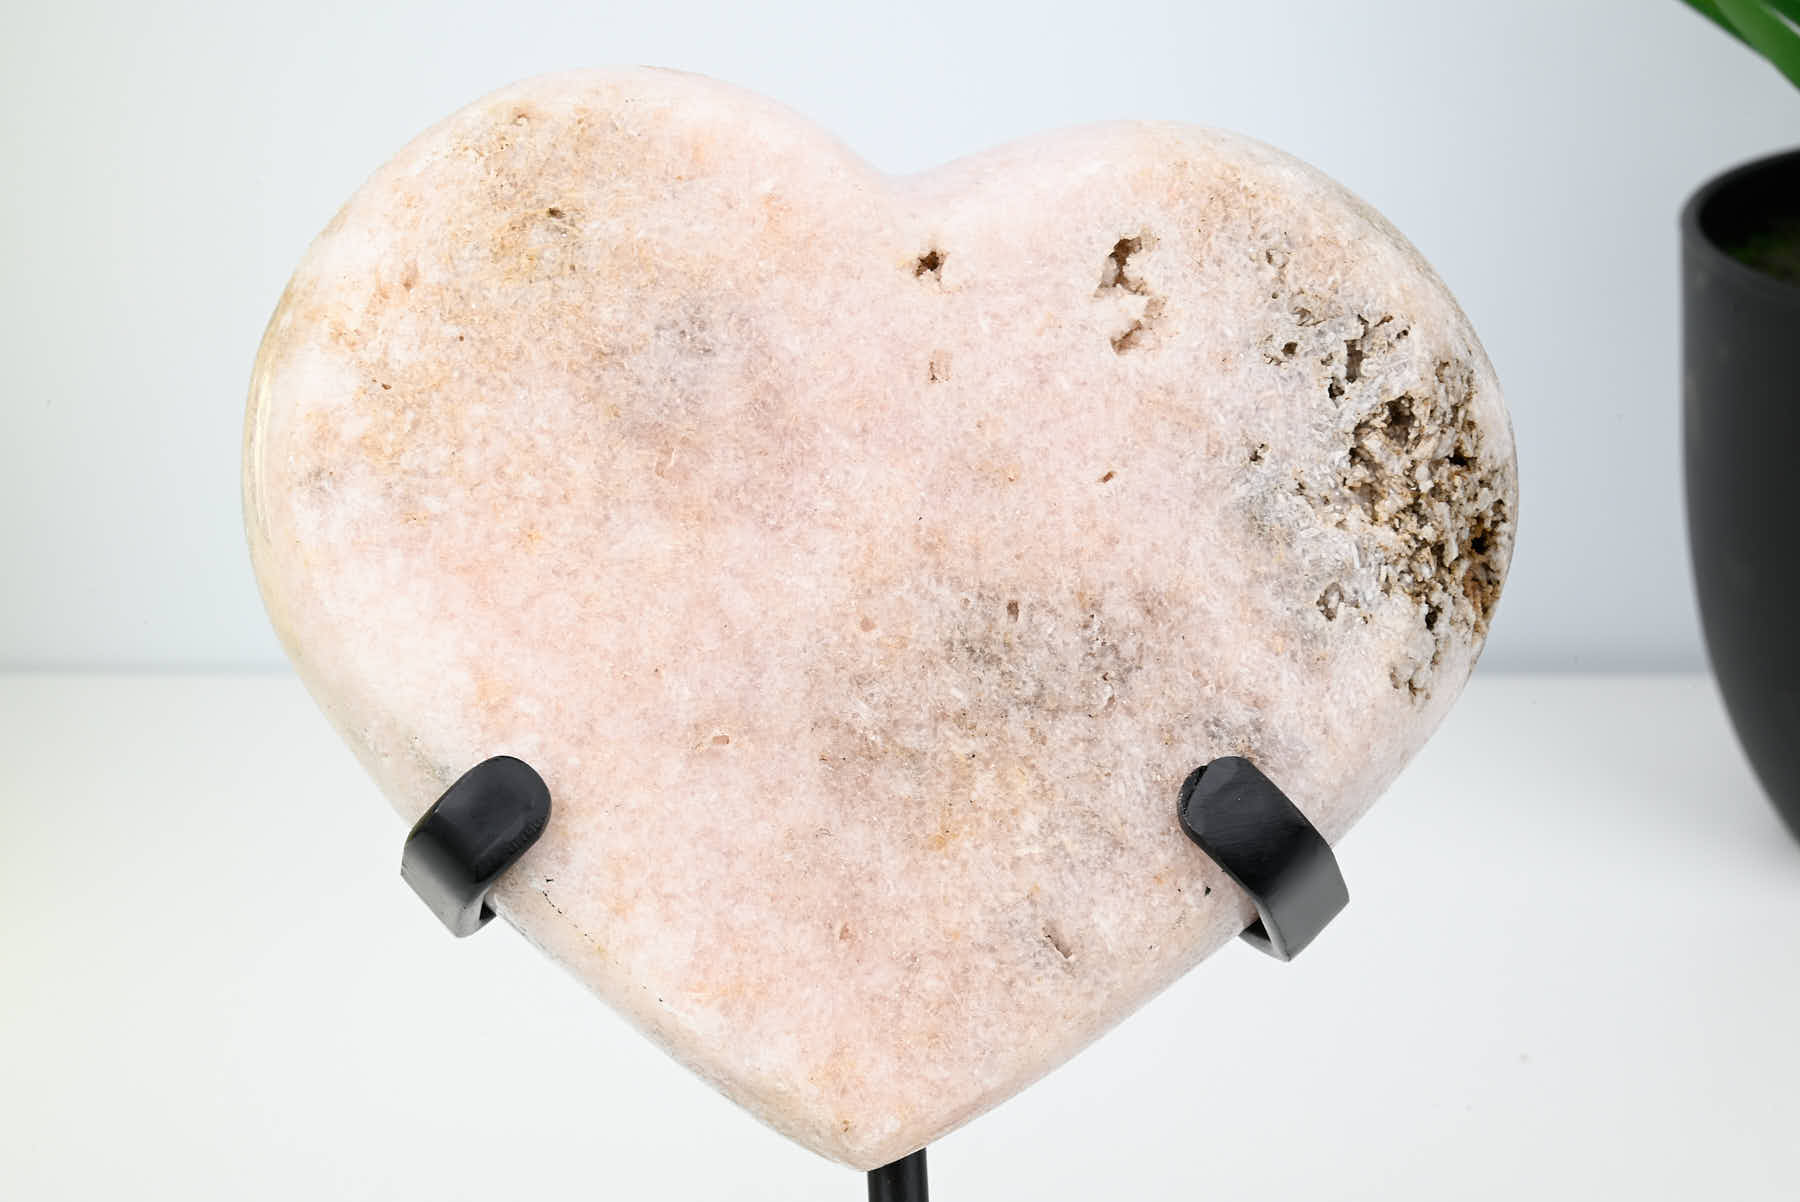 Extra Quality Pink Amethyst Heart - 0.96kg, 16cm high - #HTPINK-34028